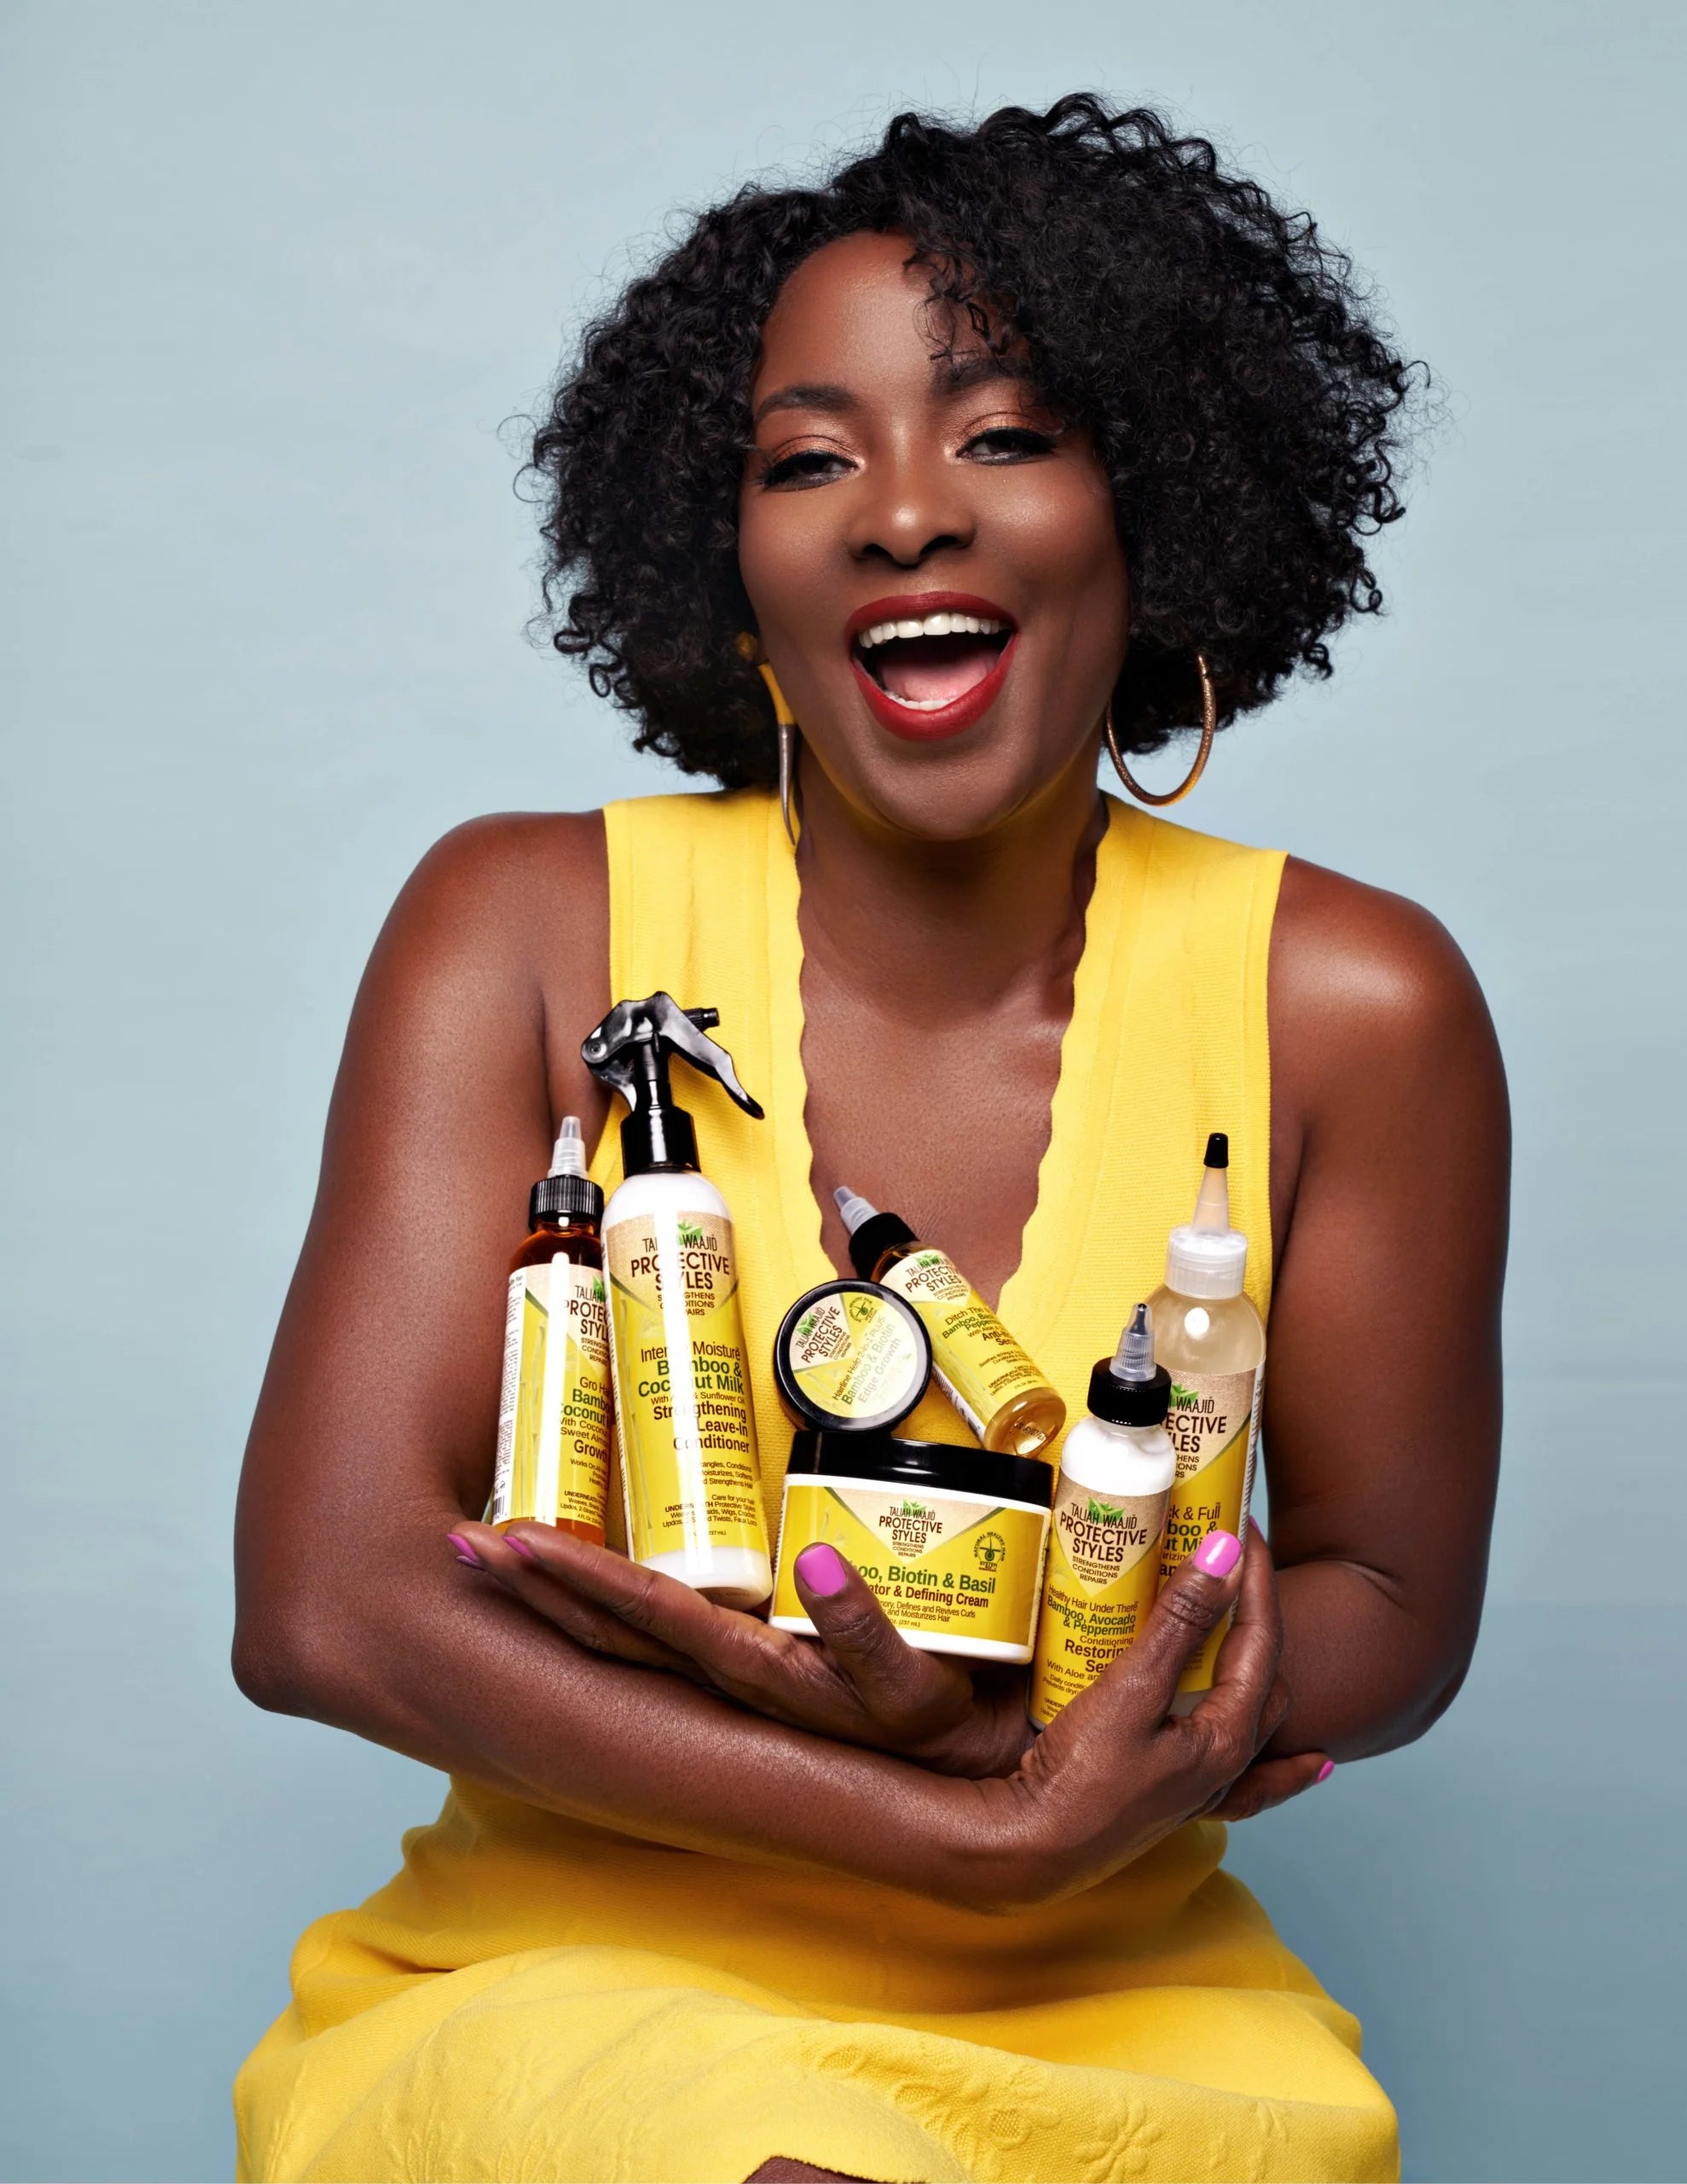 Ode to Black Beauty: Shop Black-Owned Beauty Products